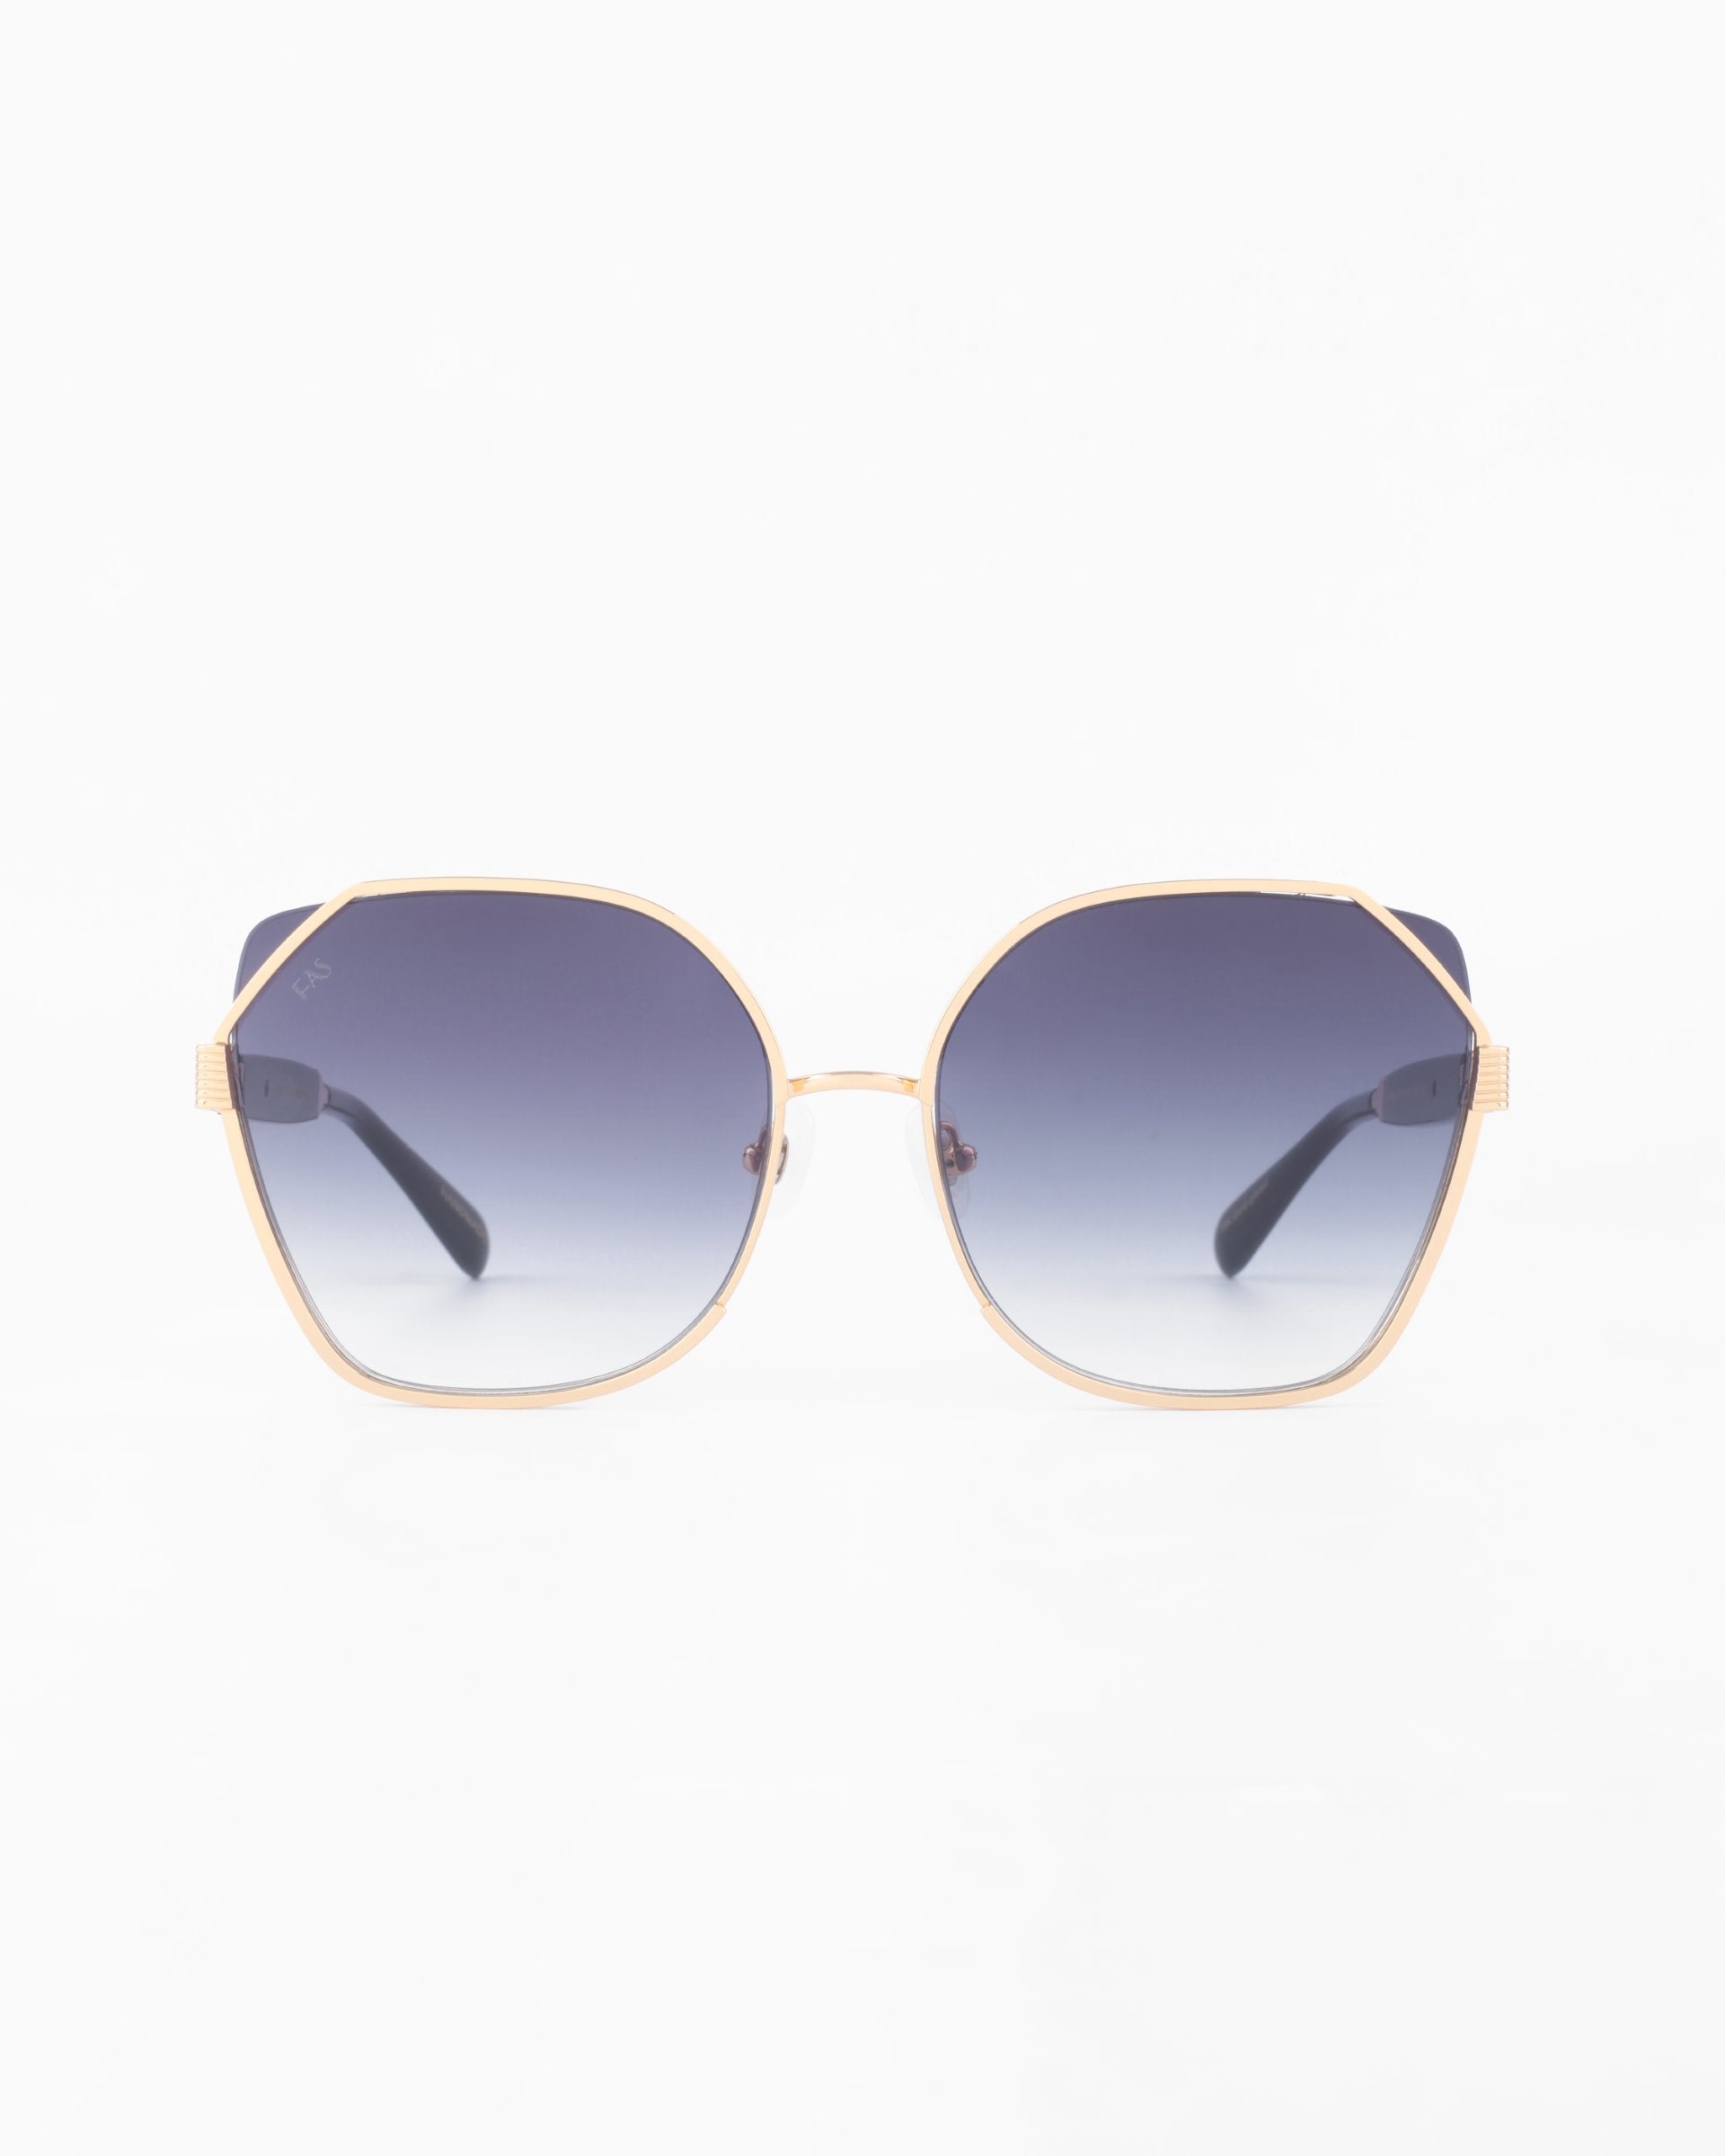 A pair of stylish For Art&#39;s Sake® Montage sunglasses with gold-plated stainless steel hexagonal frames and gradient ultra-lightweight Nylon lenses that transition from dark at the top to lighter at the bottom. The temples are black, and the overall design is sleek and modern against a plain white background.